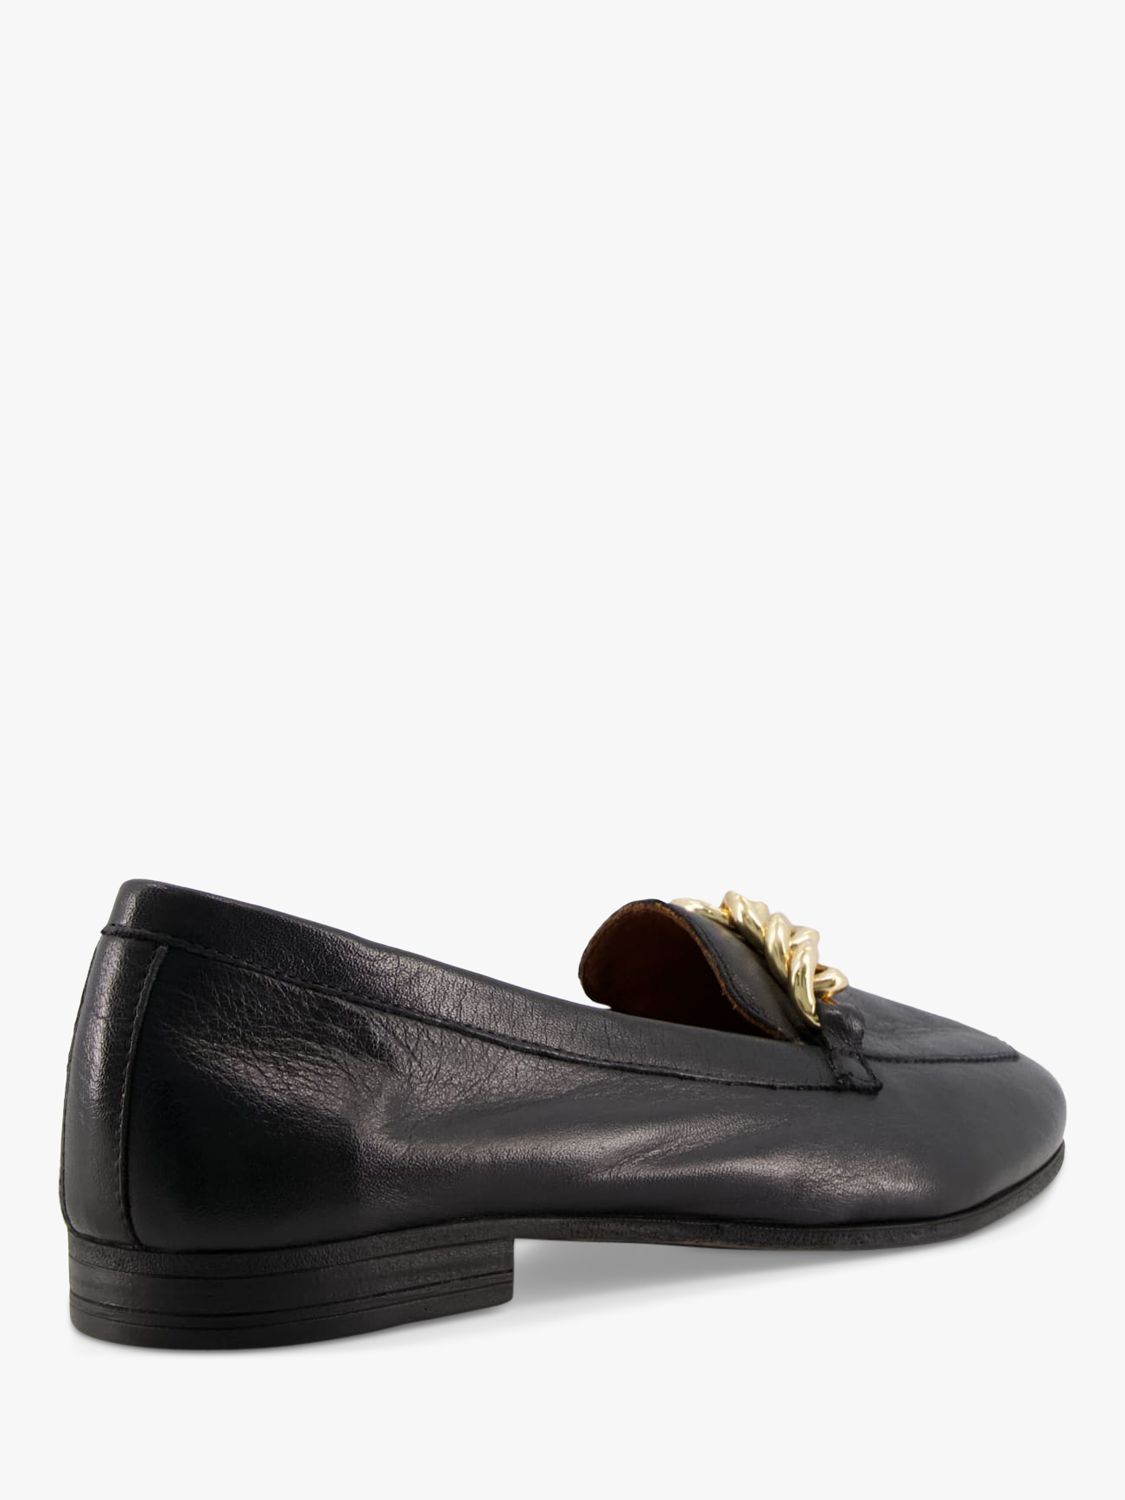 Dune Goldsmith Leather Chain Detail Loafers, Black, 3